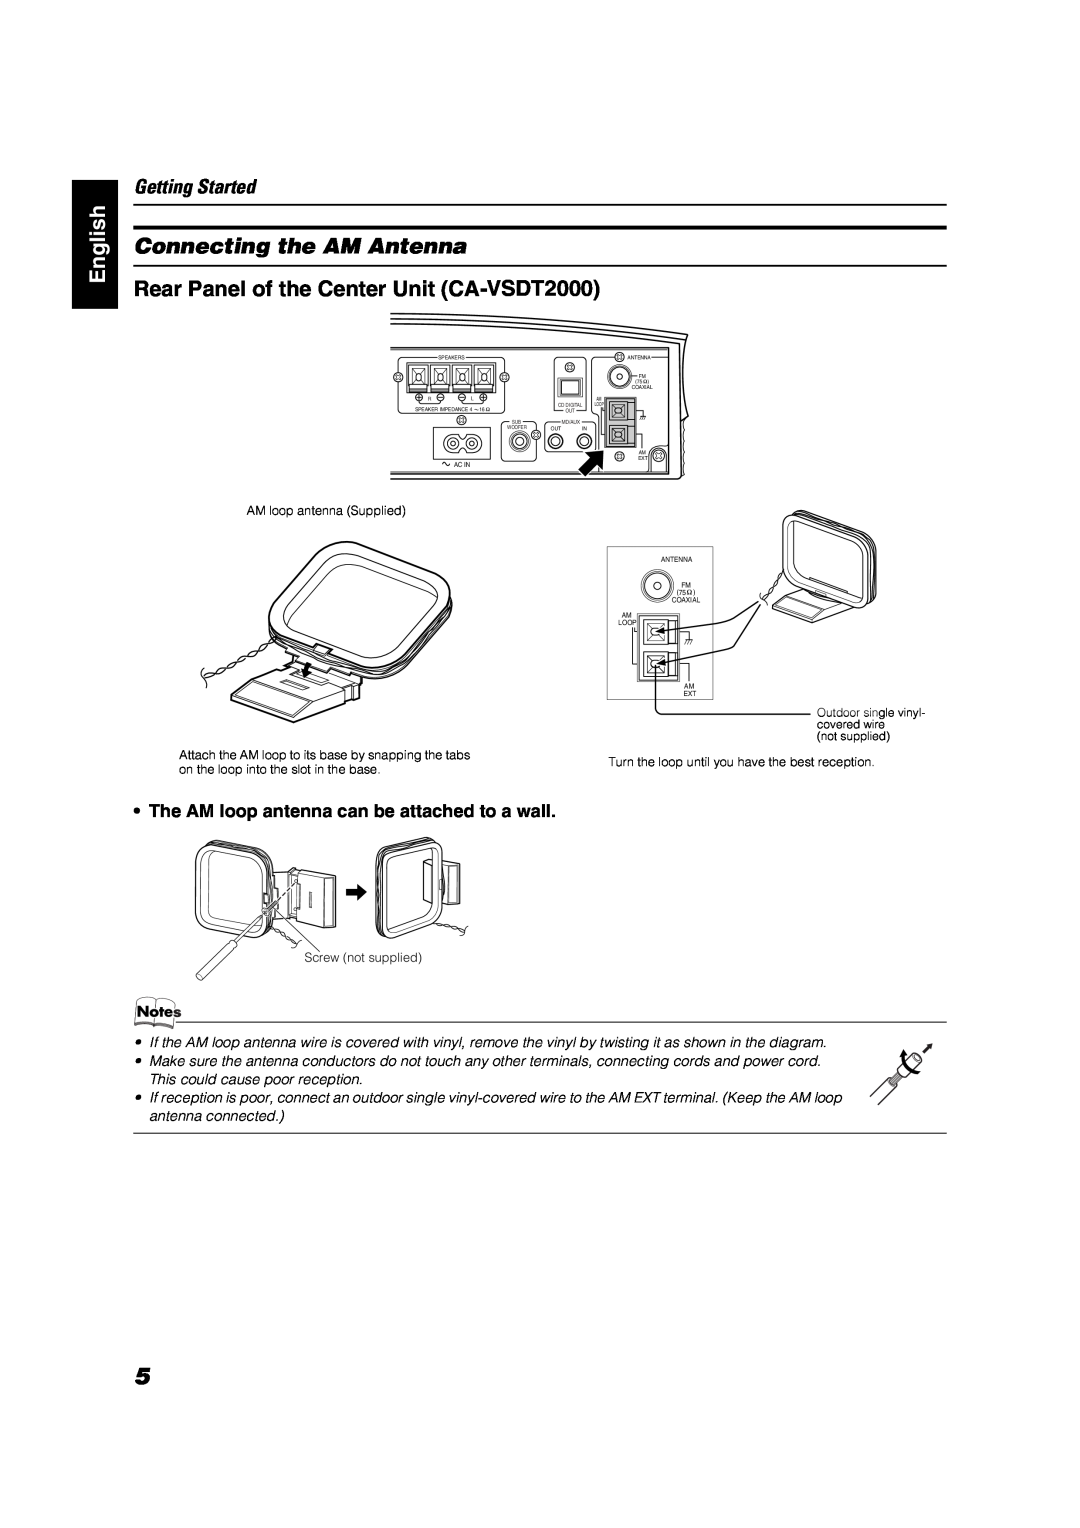 JVC VS-DT2000 manual English, Connecting the AM Antenna, Getting Started, The AM loop antenna can be attached to a wall 